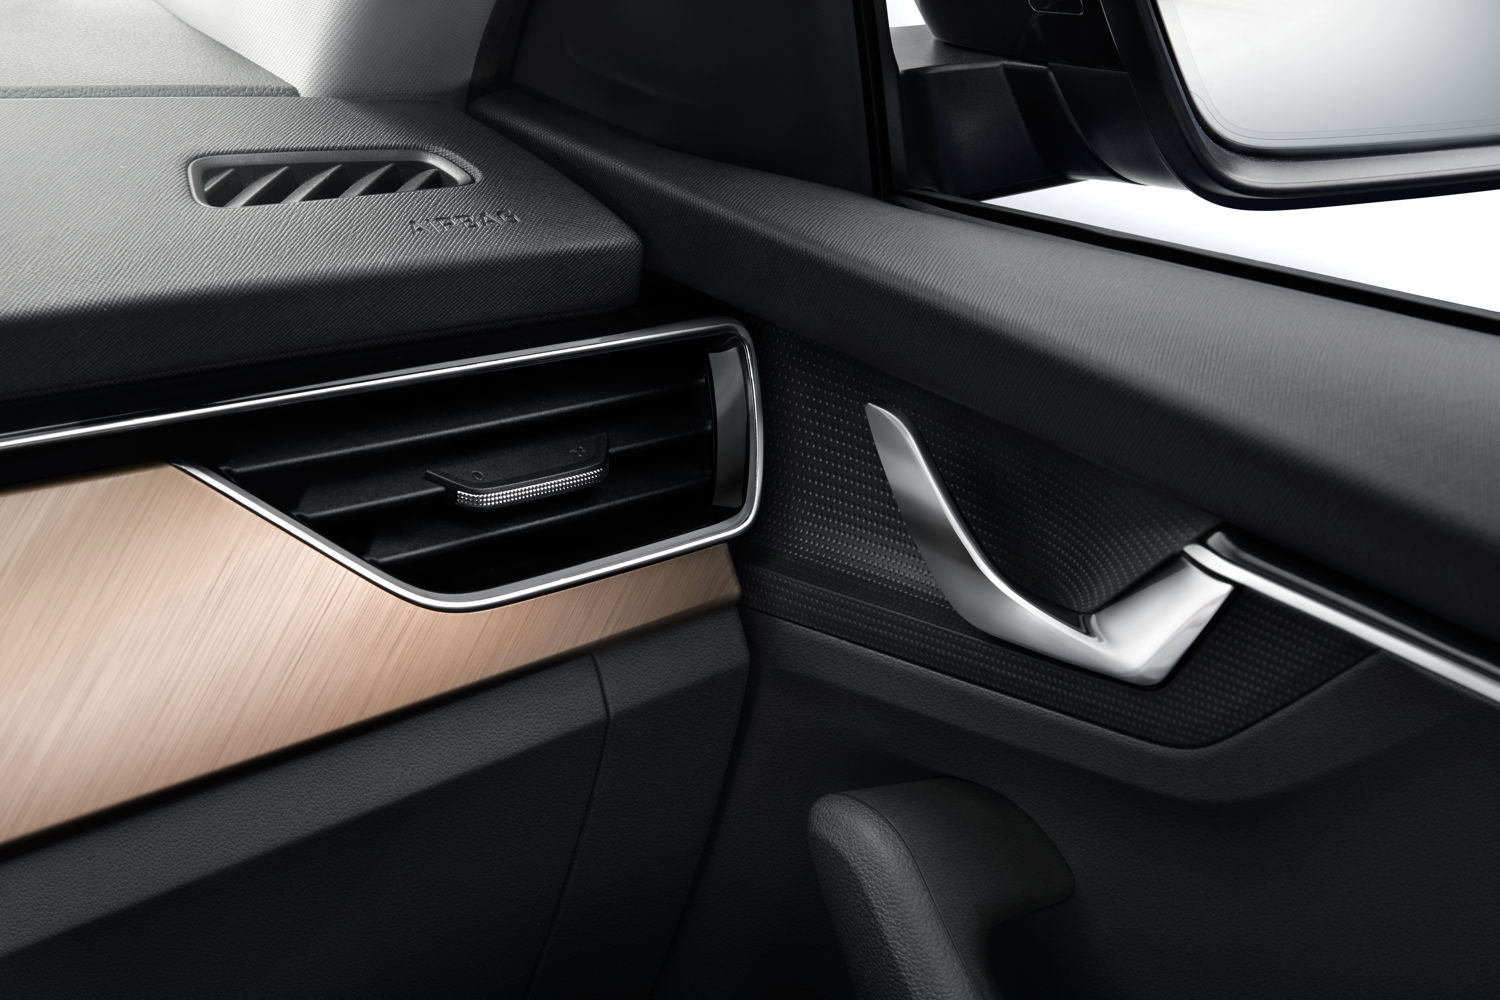 The lateral air vents extend into the doors and amplify the visual impression of width, adding to the generous sense of space in the new ŠKODA SCALA.